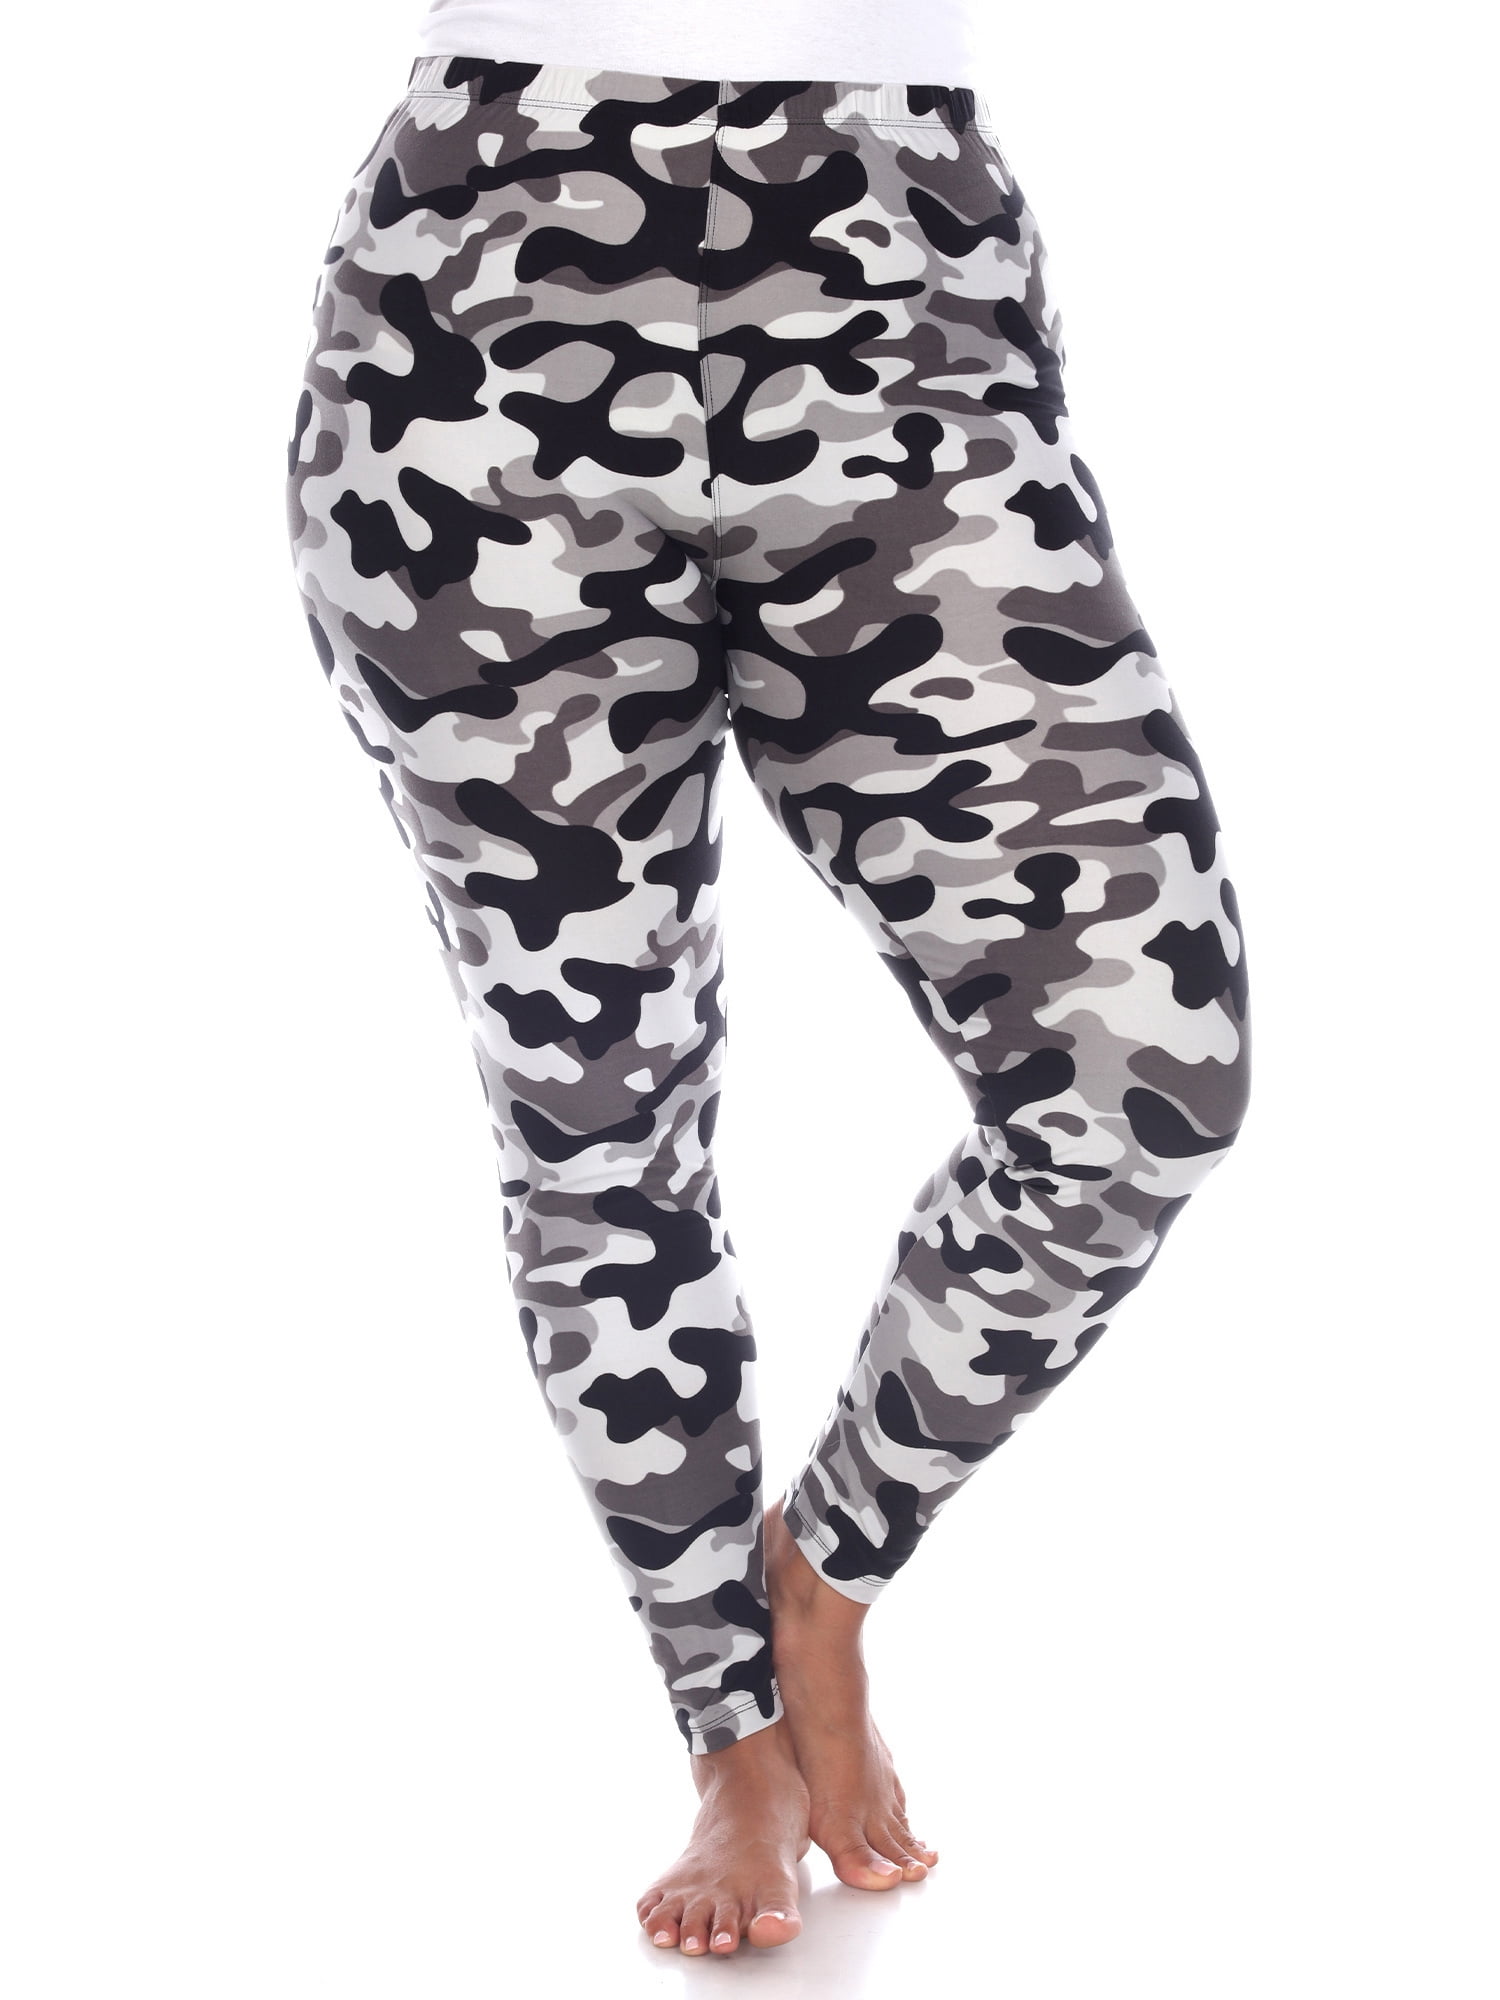  Conceited Camo Print Plus Size Leggings For Women